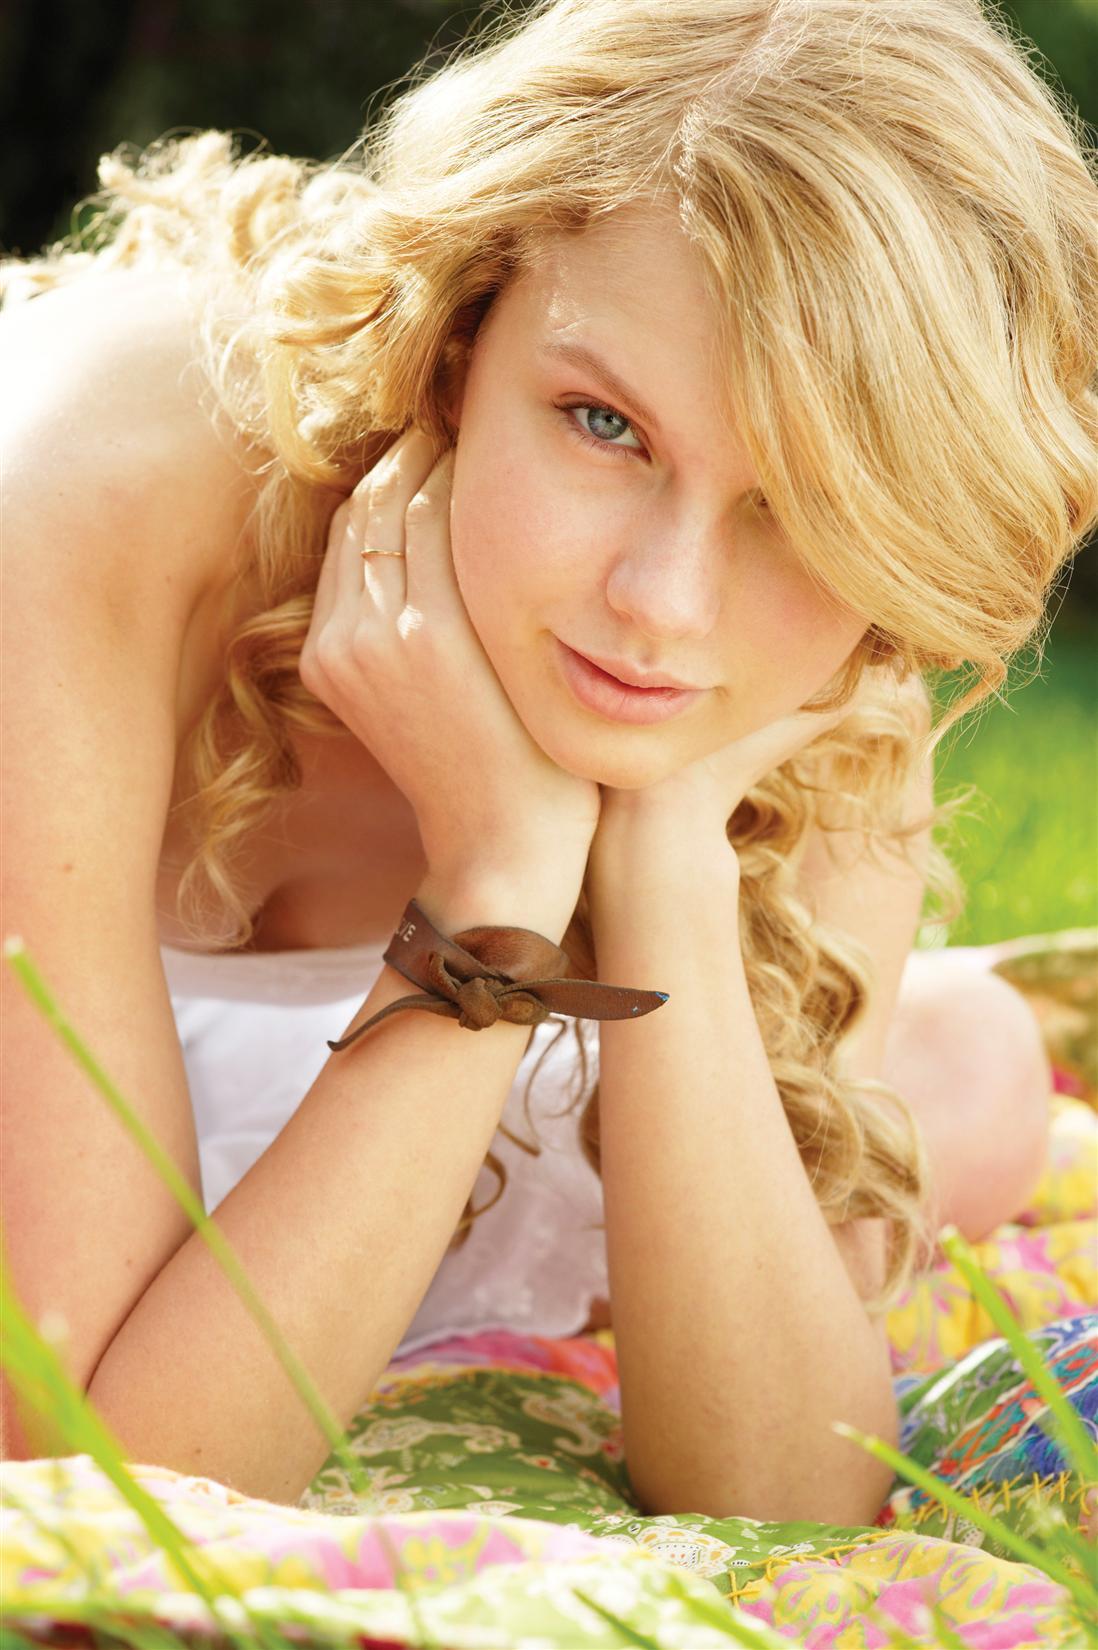 Taylor Swift Without Makeup. This entry was posted on Sunday